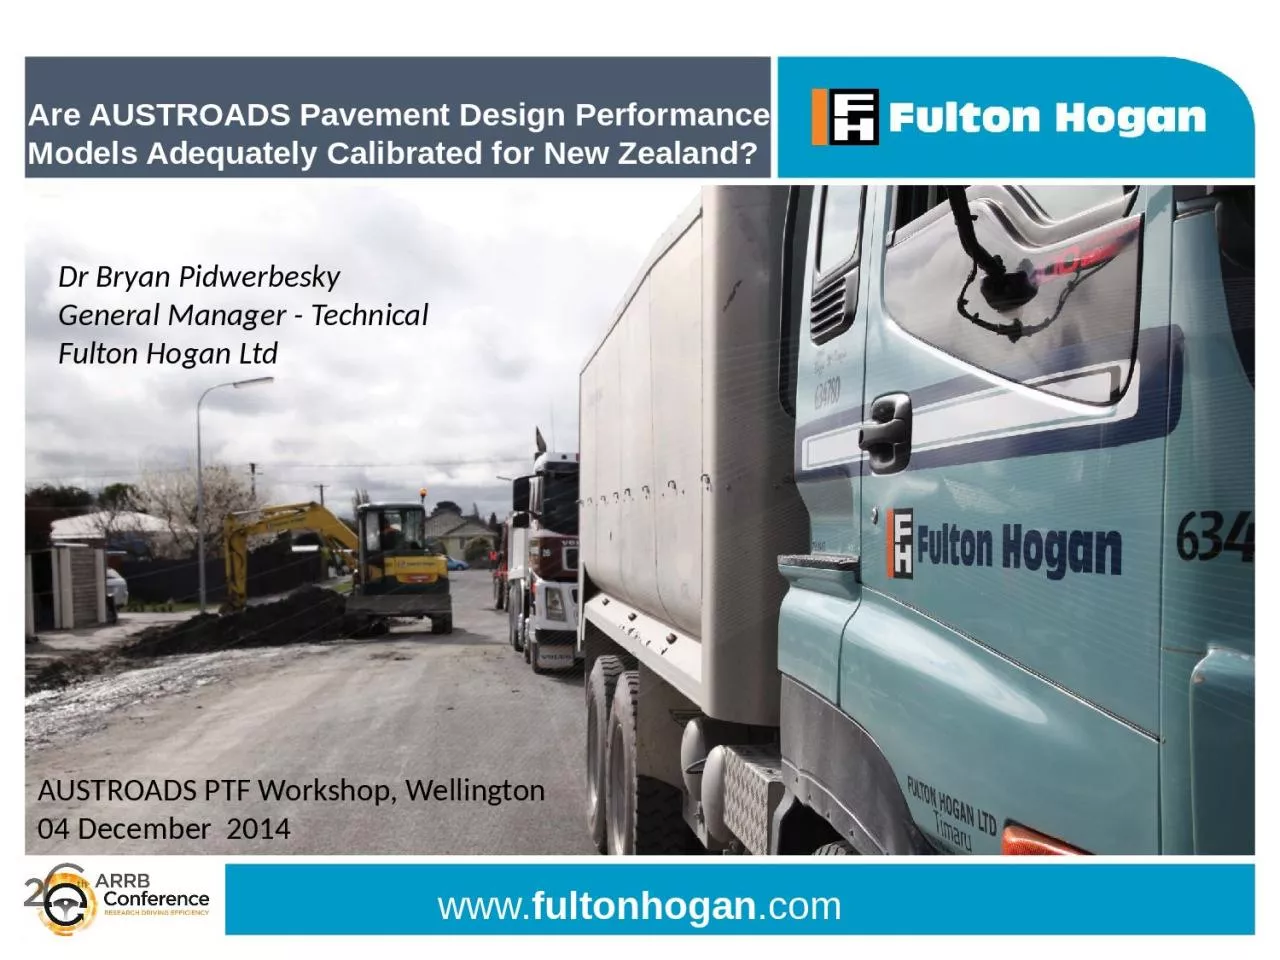 Are AUSTROADS Pavement Design Performance Models Adequately Calibrated for New Zealand?